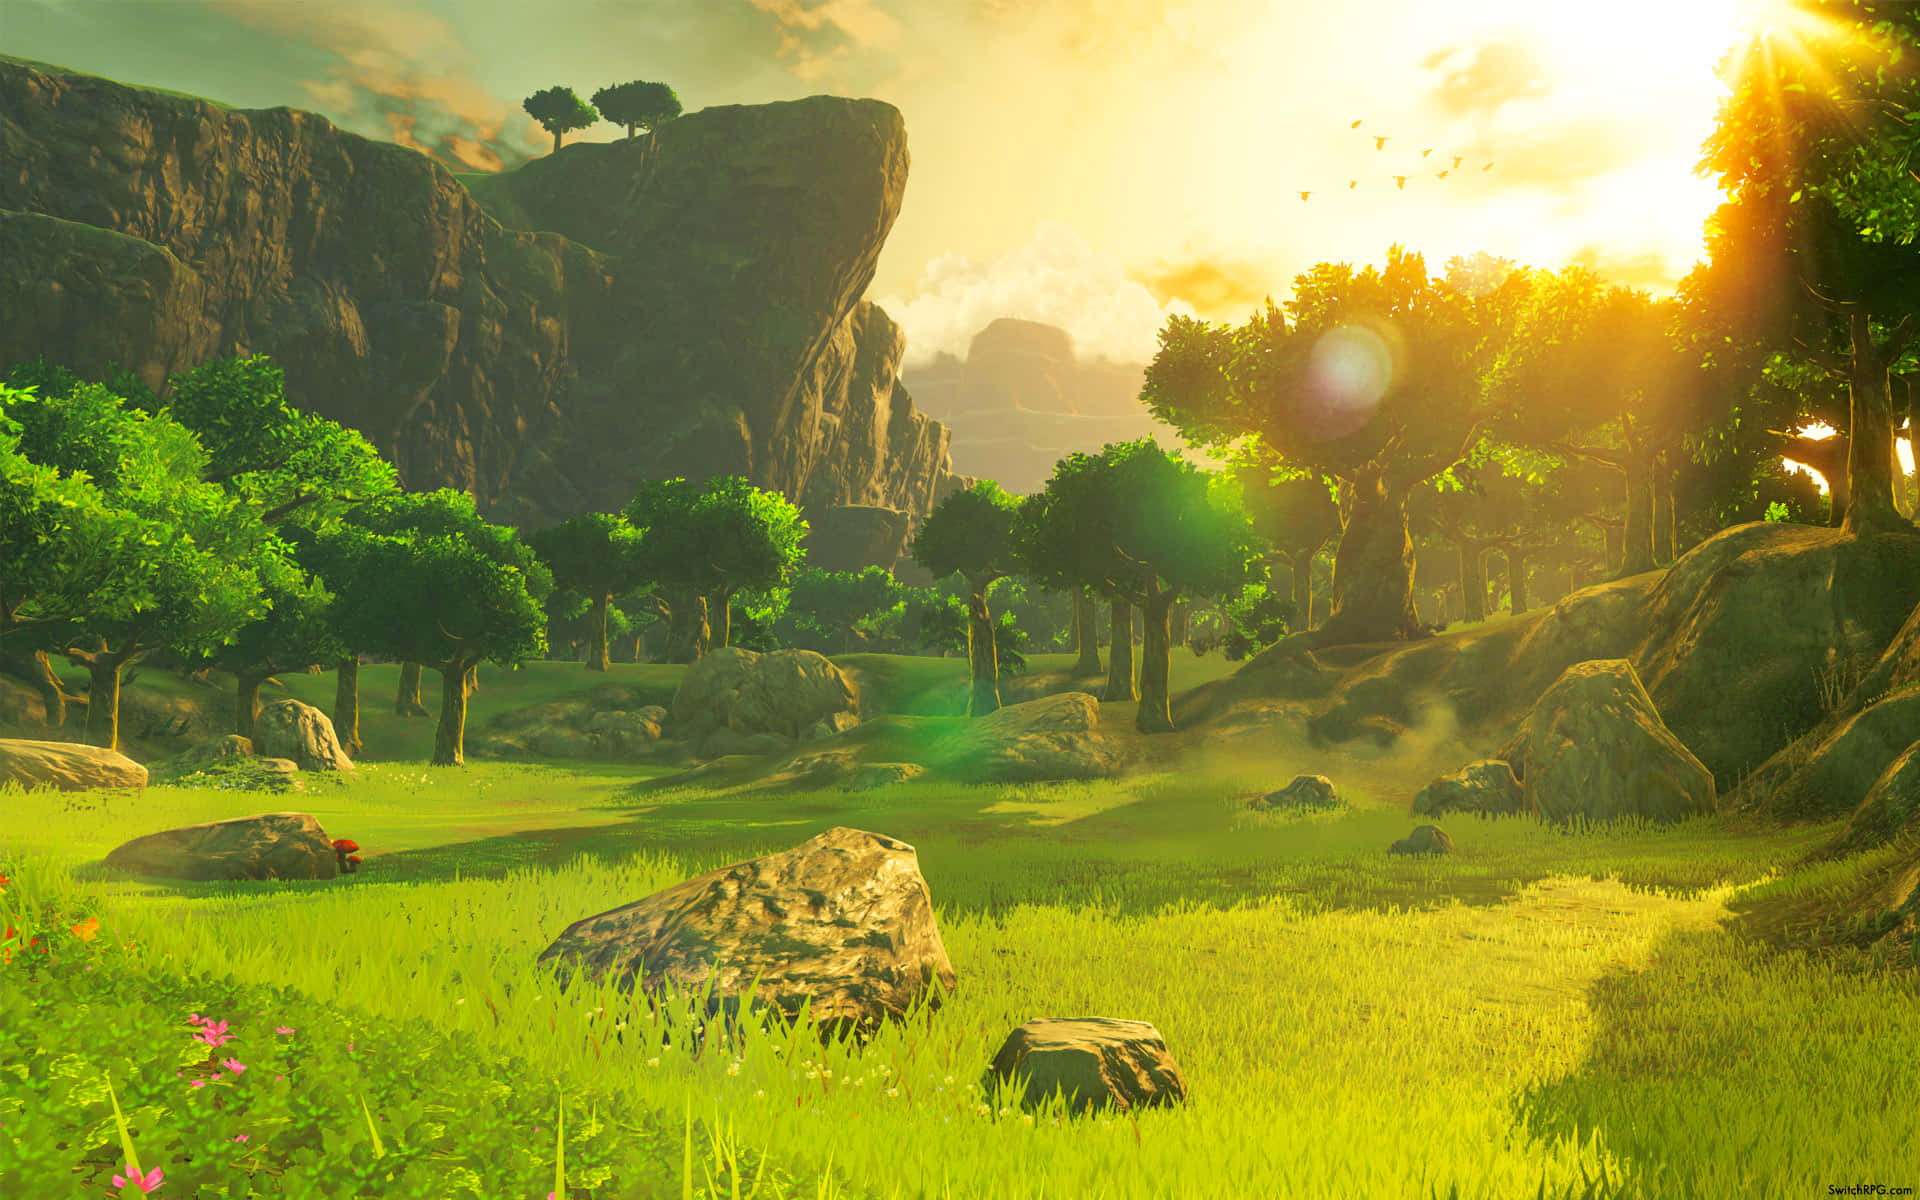 Scenic view of Hyrule landscape in the background from The Legend of Zelda: Breath of the Wild